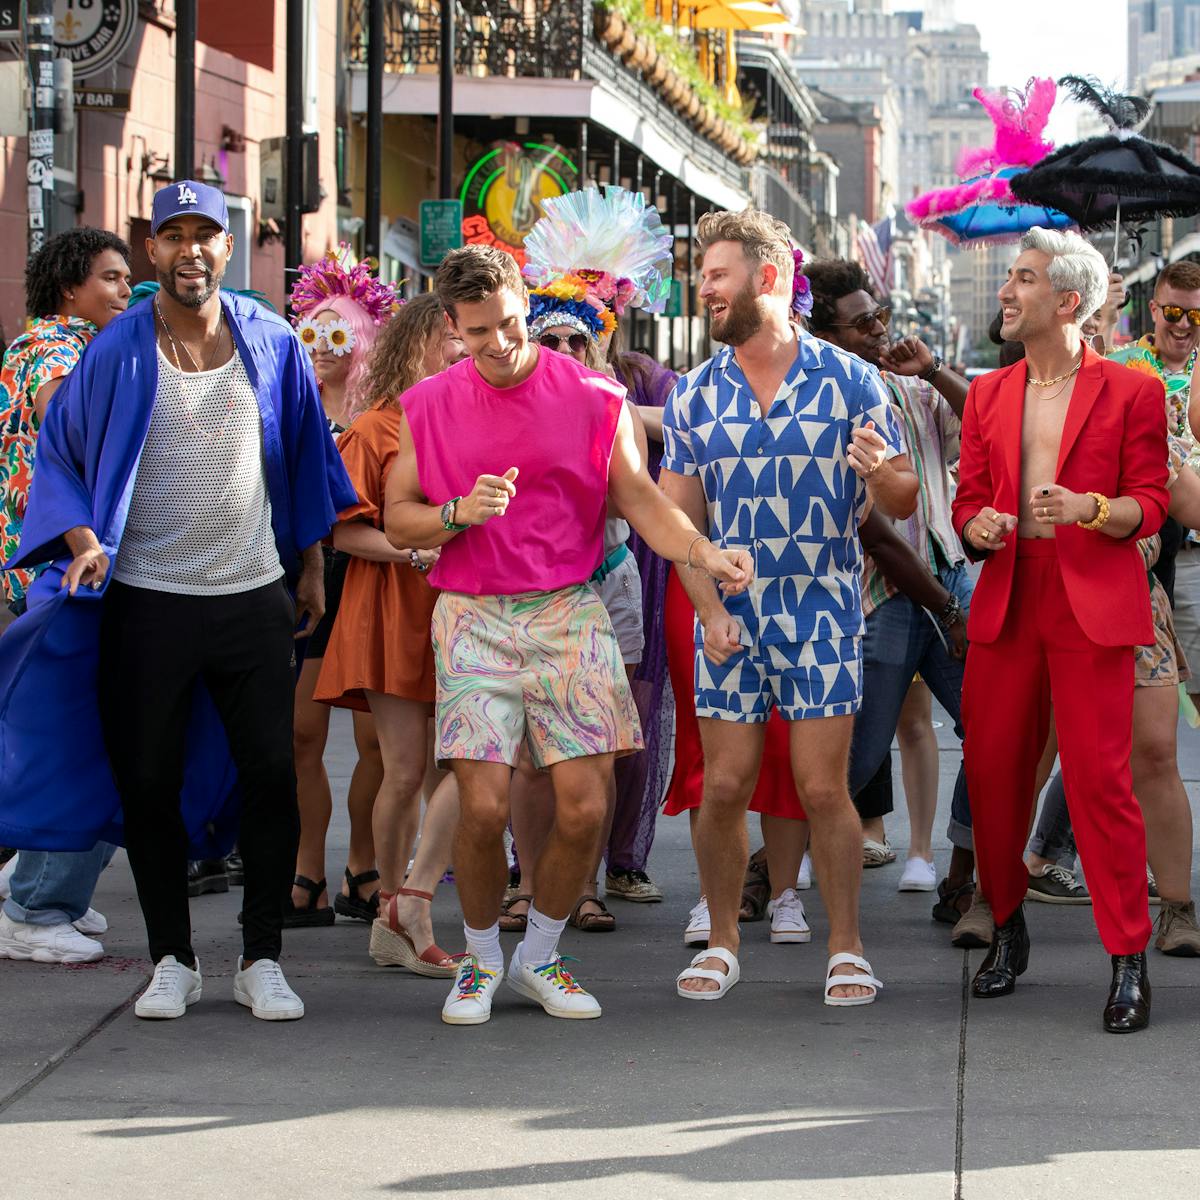 The Fab Five stand in front of a crowd of New Orleans heroes. Karamo wears black pants, a white tank top, a blue button-down, and a blue hat. Antoni wears a pink shirt and patterned shorts. Bobby wears a blue and white patterned romper. Tan wears a red suit and dark shoes. Jonathan wears a colorful strapless dress and heels. 